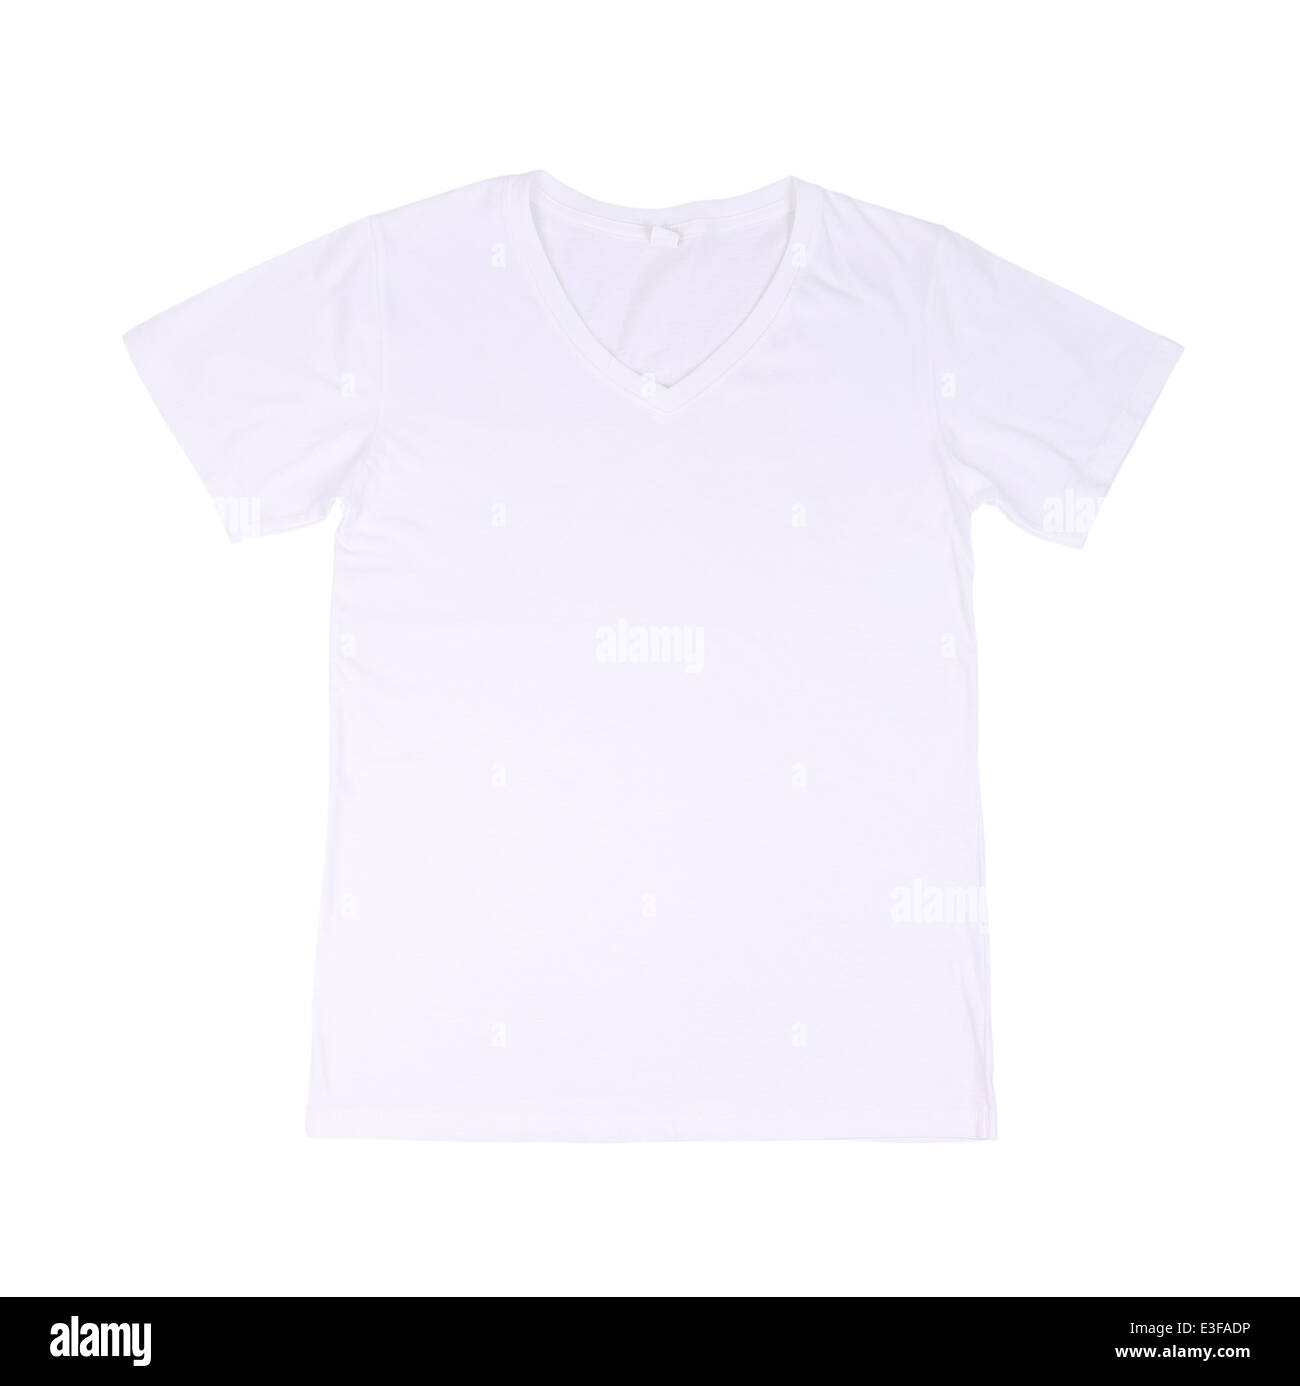 White t-shirt with blue insets isolated on a white background, Stock image